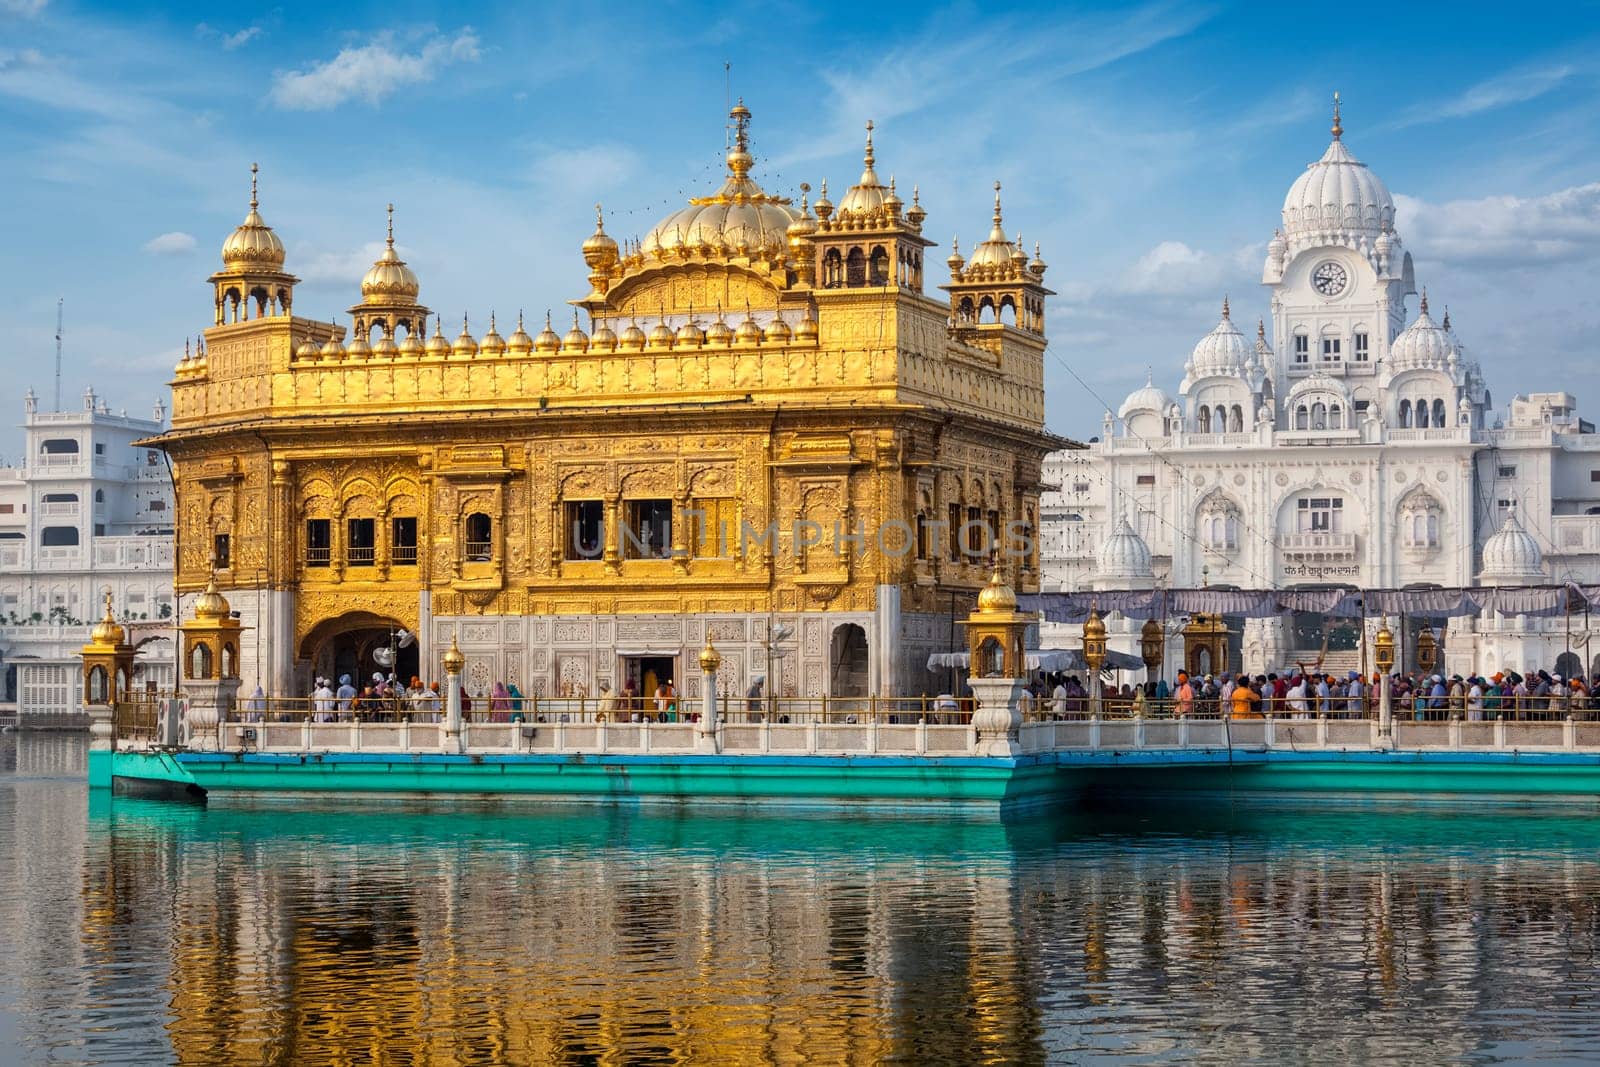 Golden Temple, Amritsar by dimol